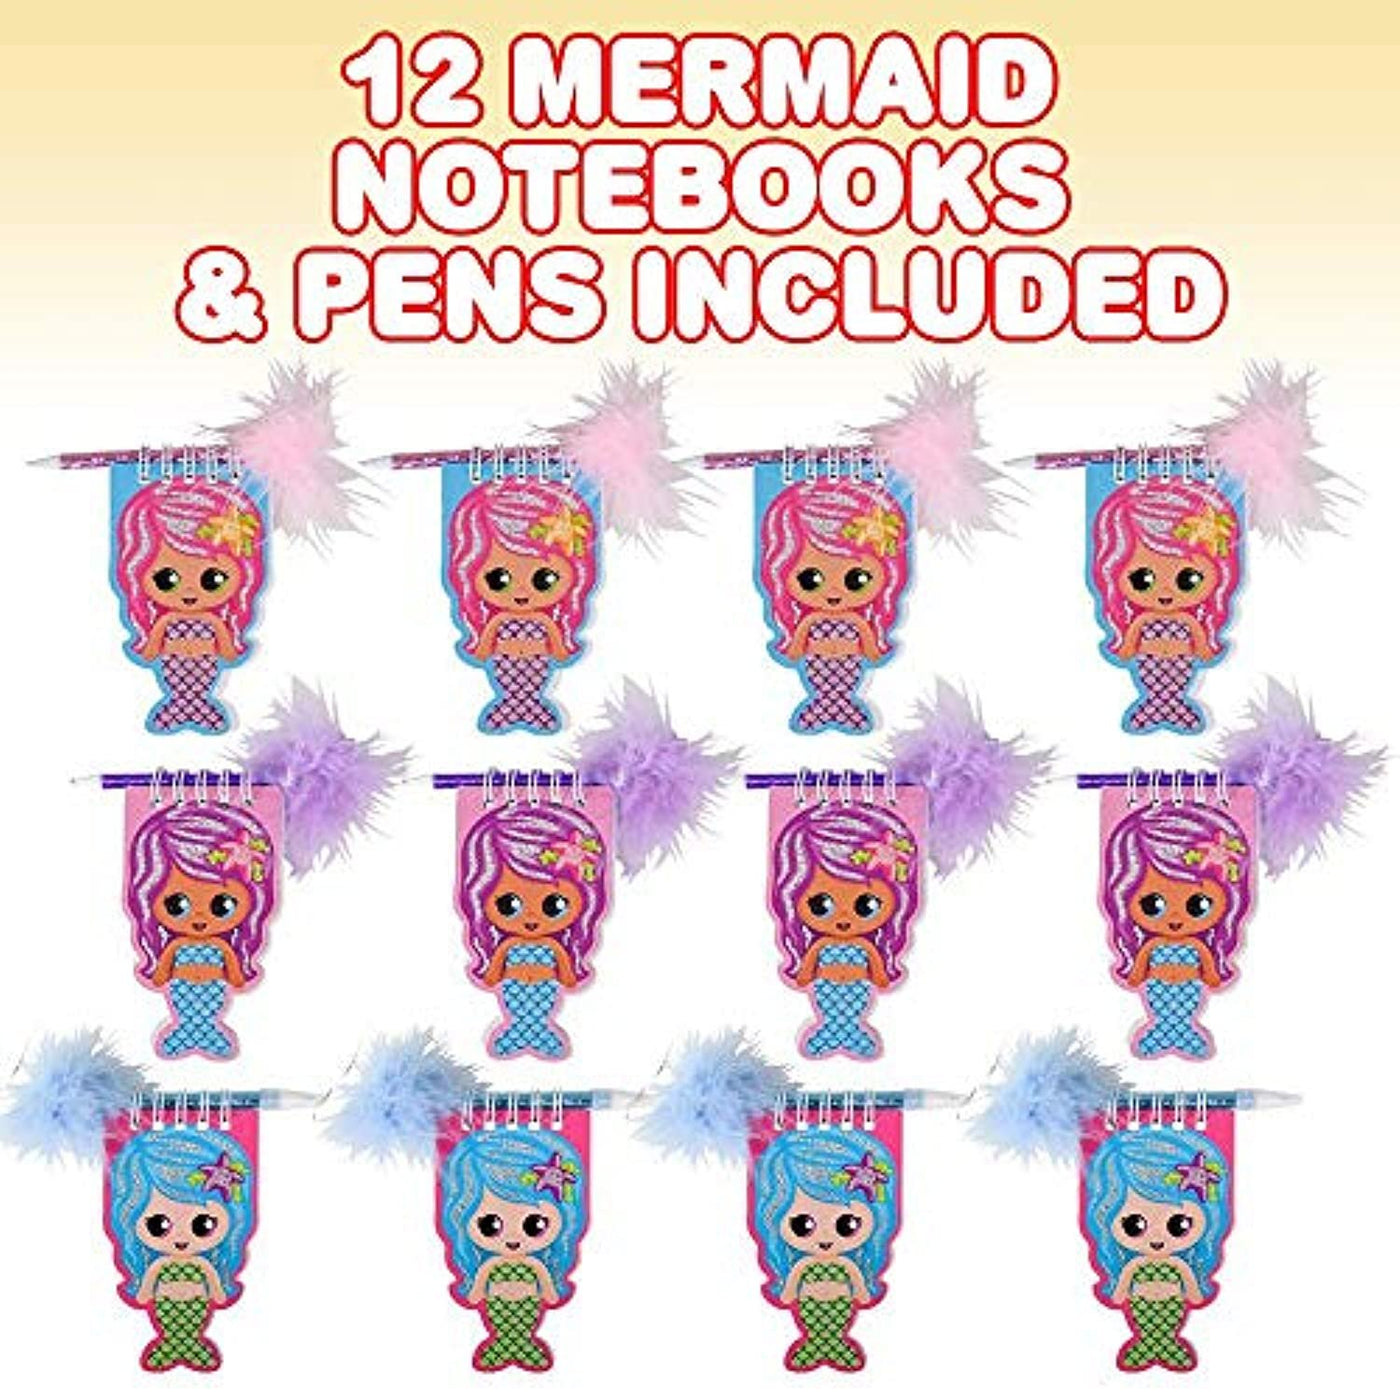 Mermaid Notebook and Pen Set for Kids, Set of 12, Feather-Tipped Pen and Small Glittery Note Pad with Loop Pen Holder Per Set, Fun Stationery Party Favors, Goodie Bag Fillers, Teacher Rewards